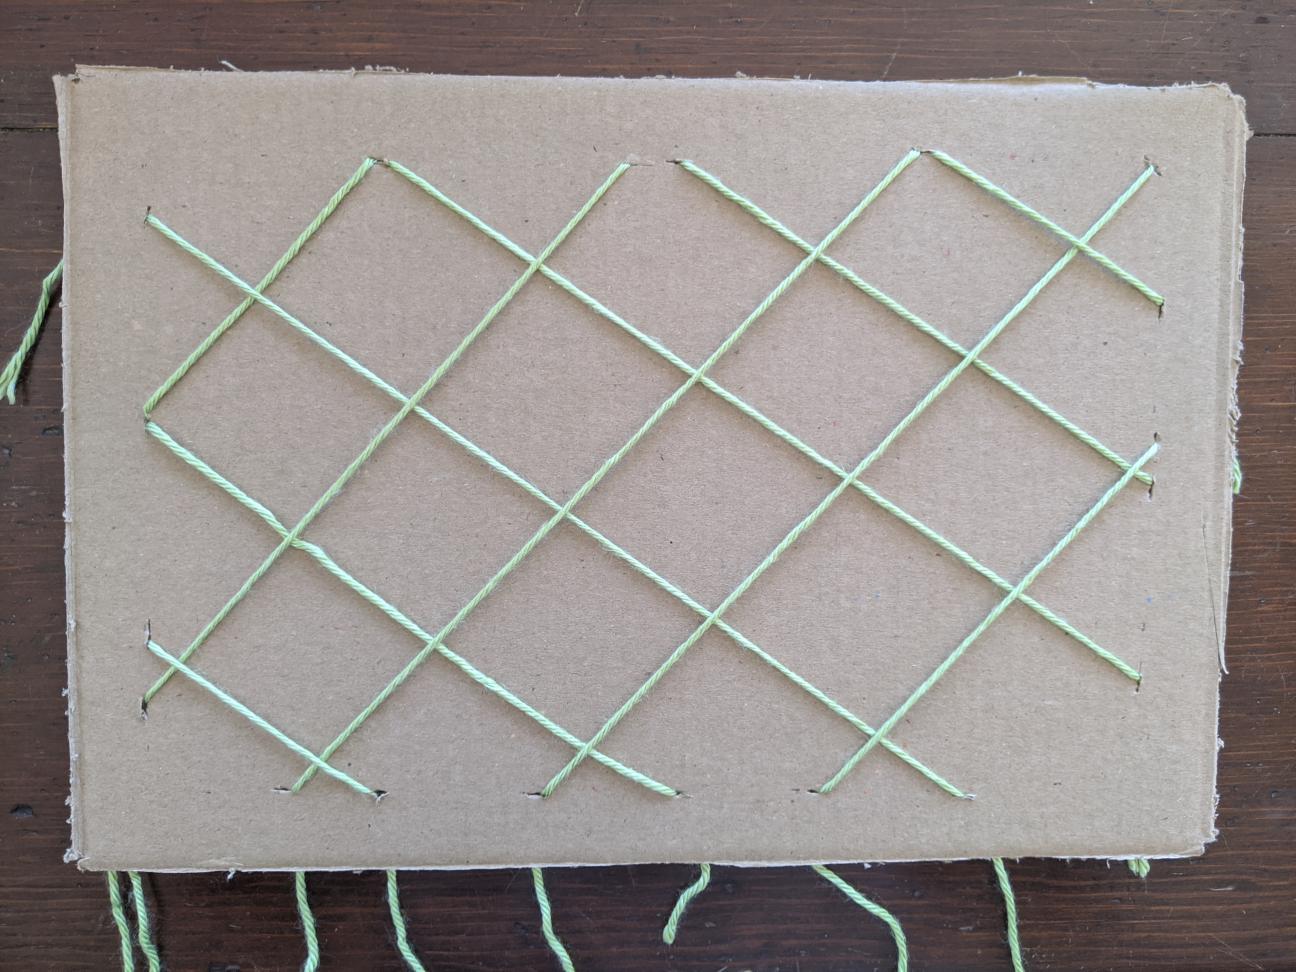 The same cardboard with yarn, only now the yarn is secured at each end point along the border.